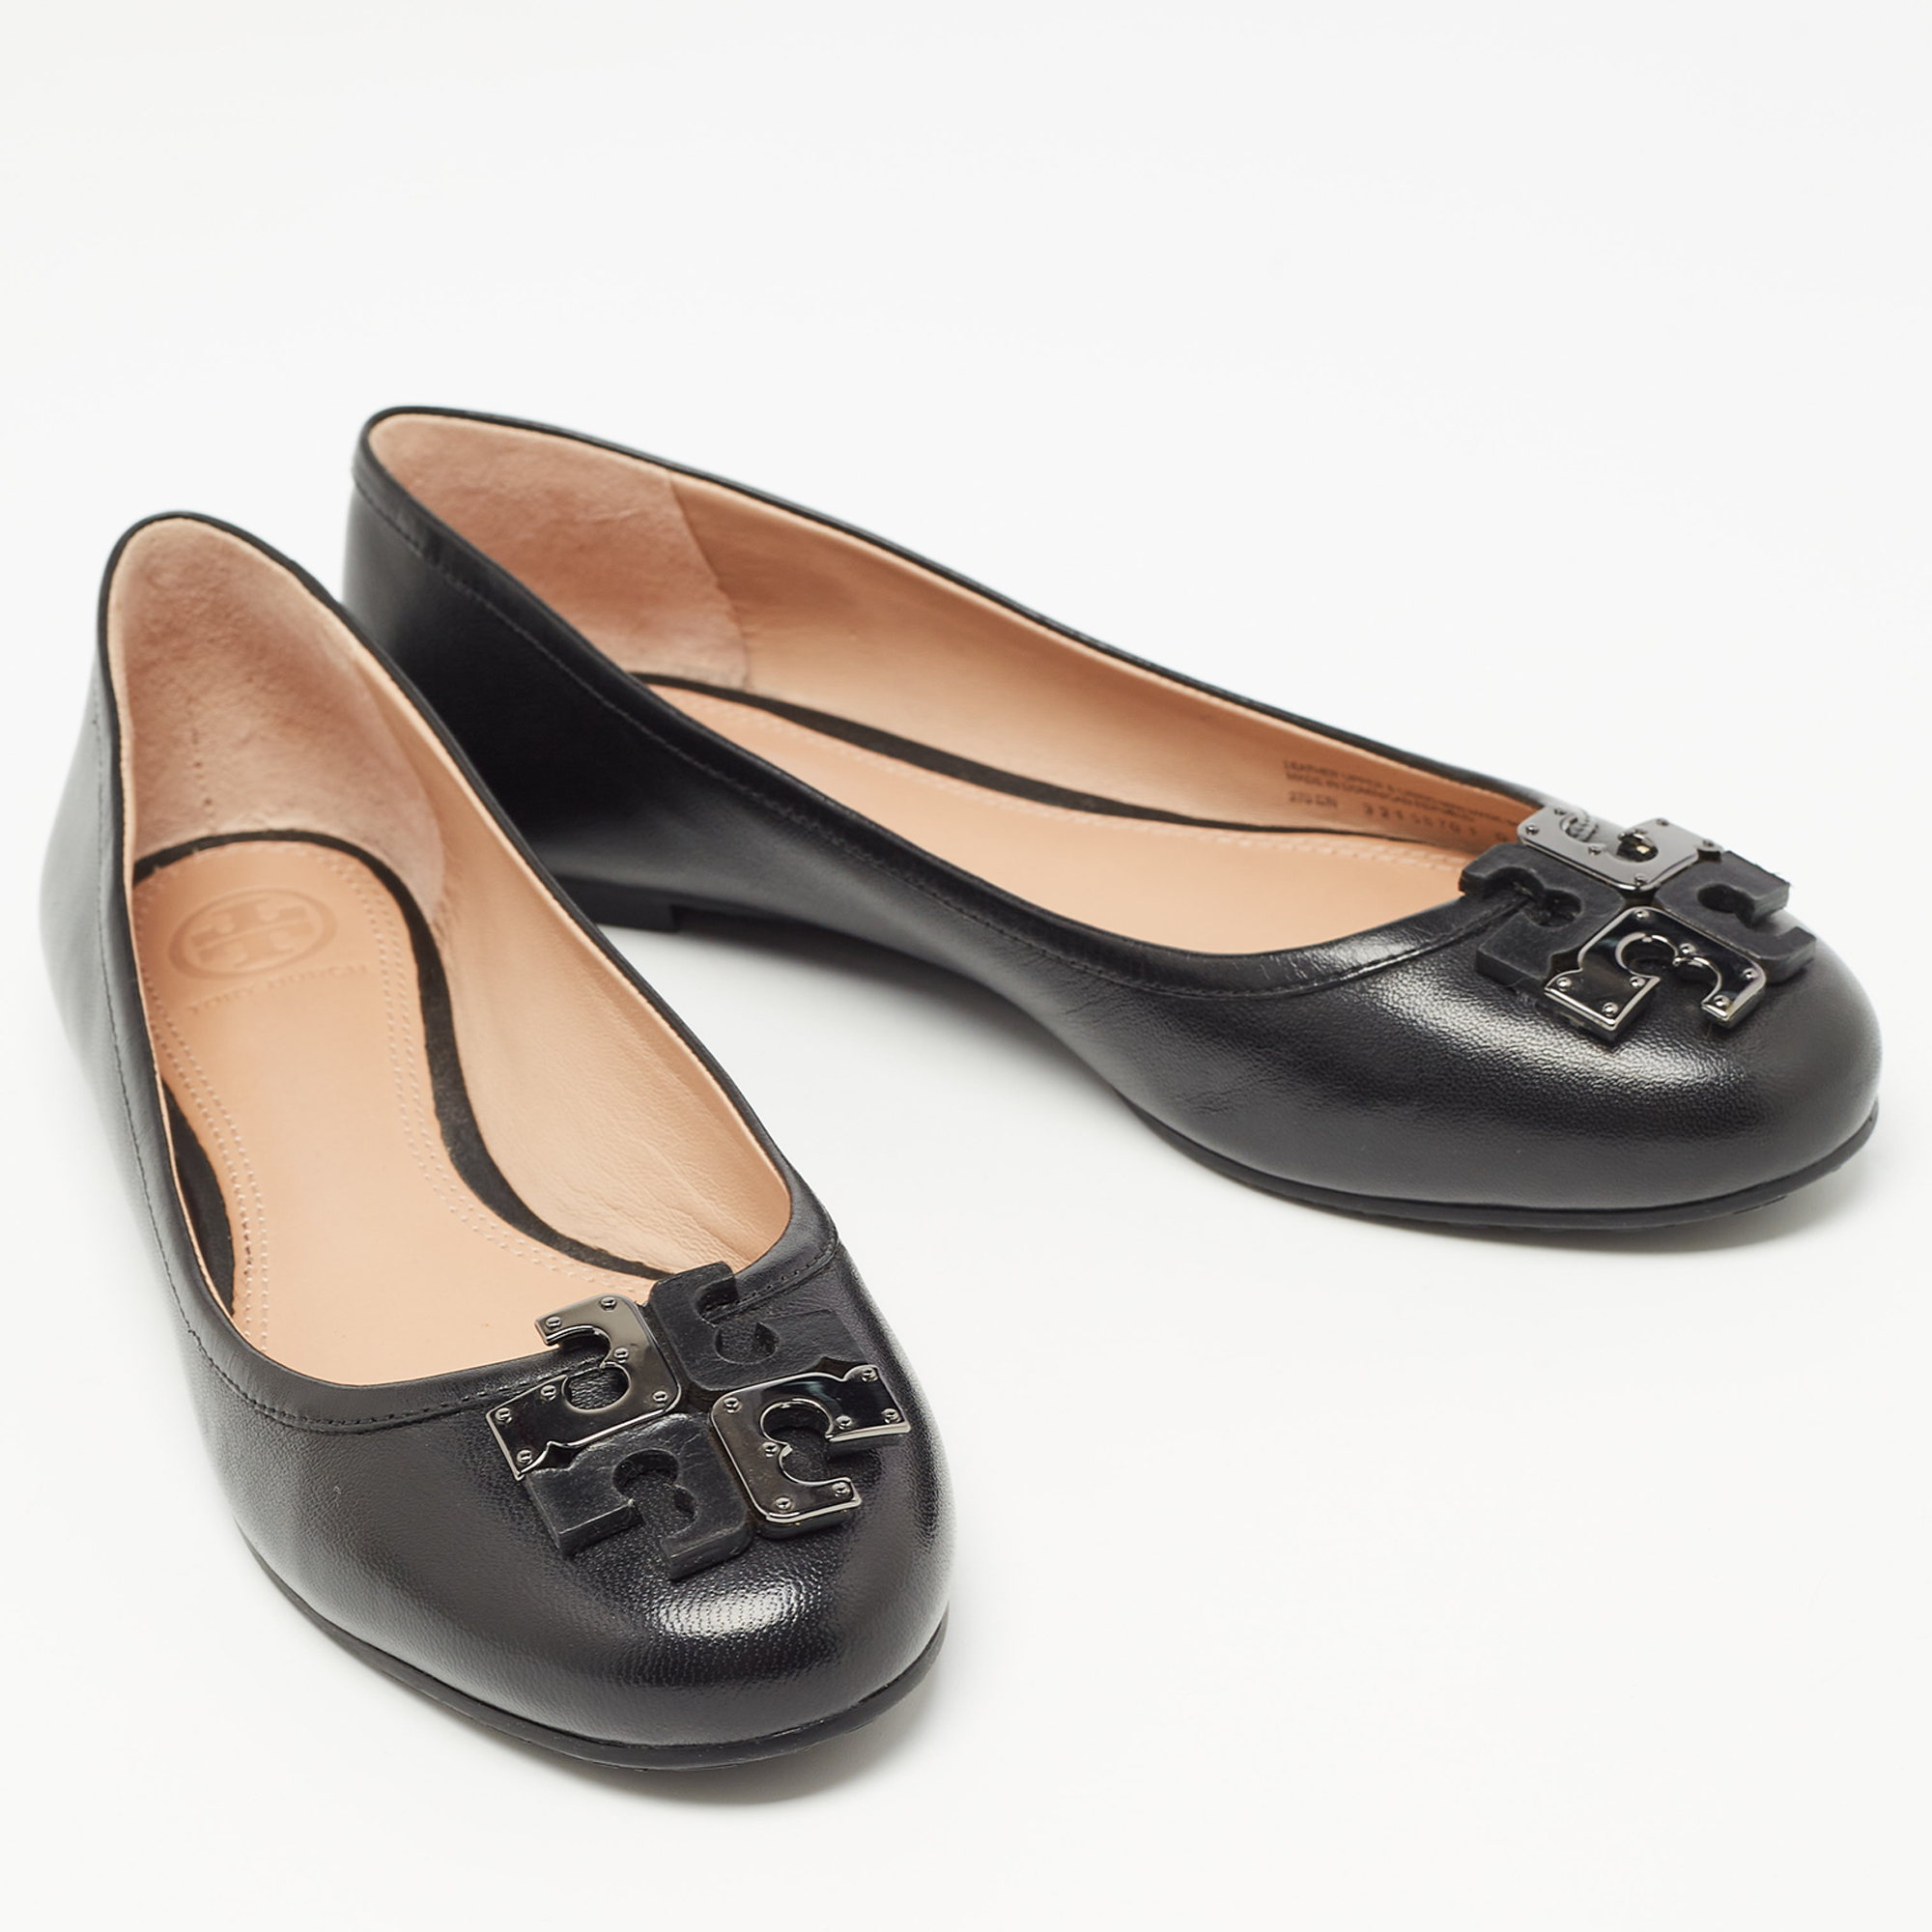 Tory Burch Black Leather Lowell Ballet Flats Size 38.5